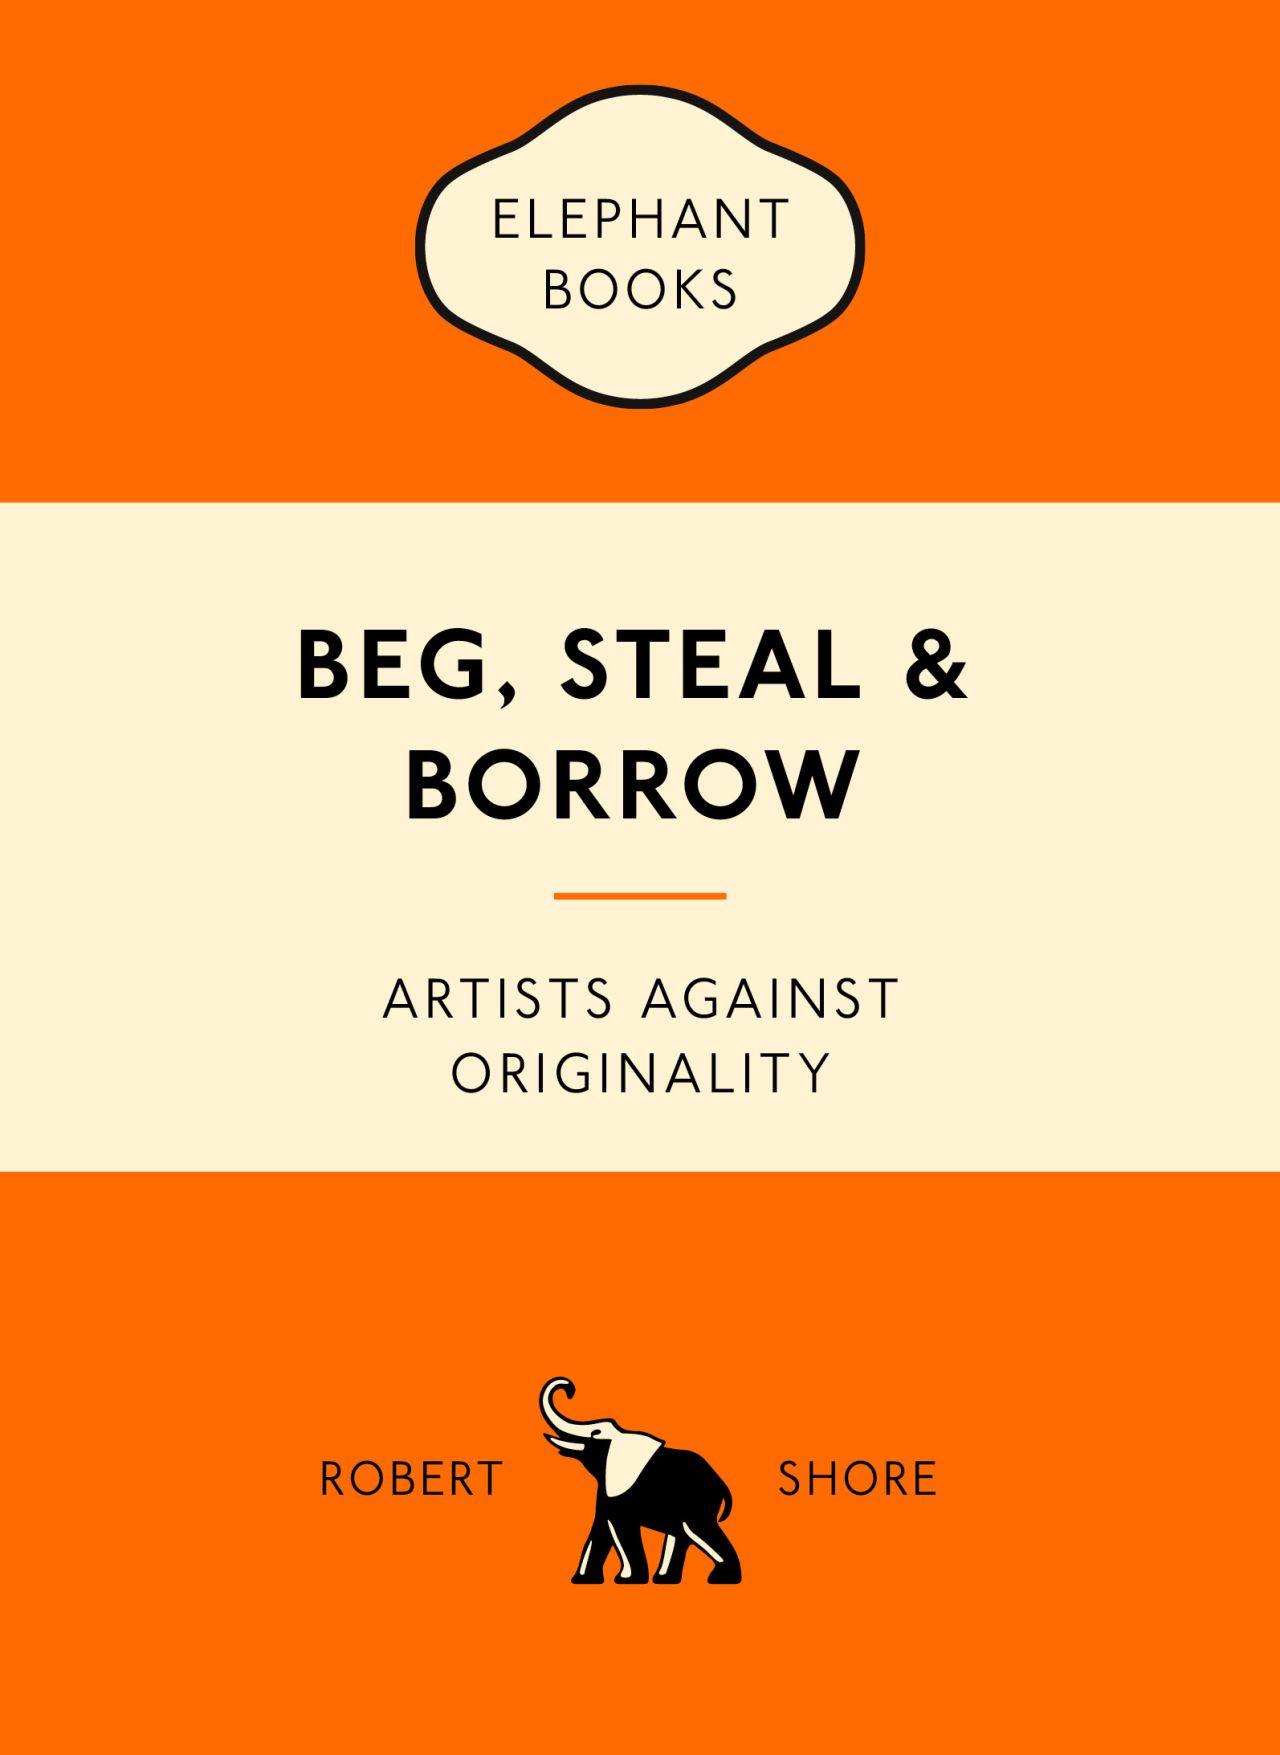 <a href="http://www.laurenceking.com/us/beg-steal-and-borrow-artists-against-originality/" target="_blank" target="_blank">"Beg, Steal & Borrow: Artists Against Originality"</a> by Robert Shore, published by Laurence King, is out now. 